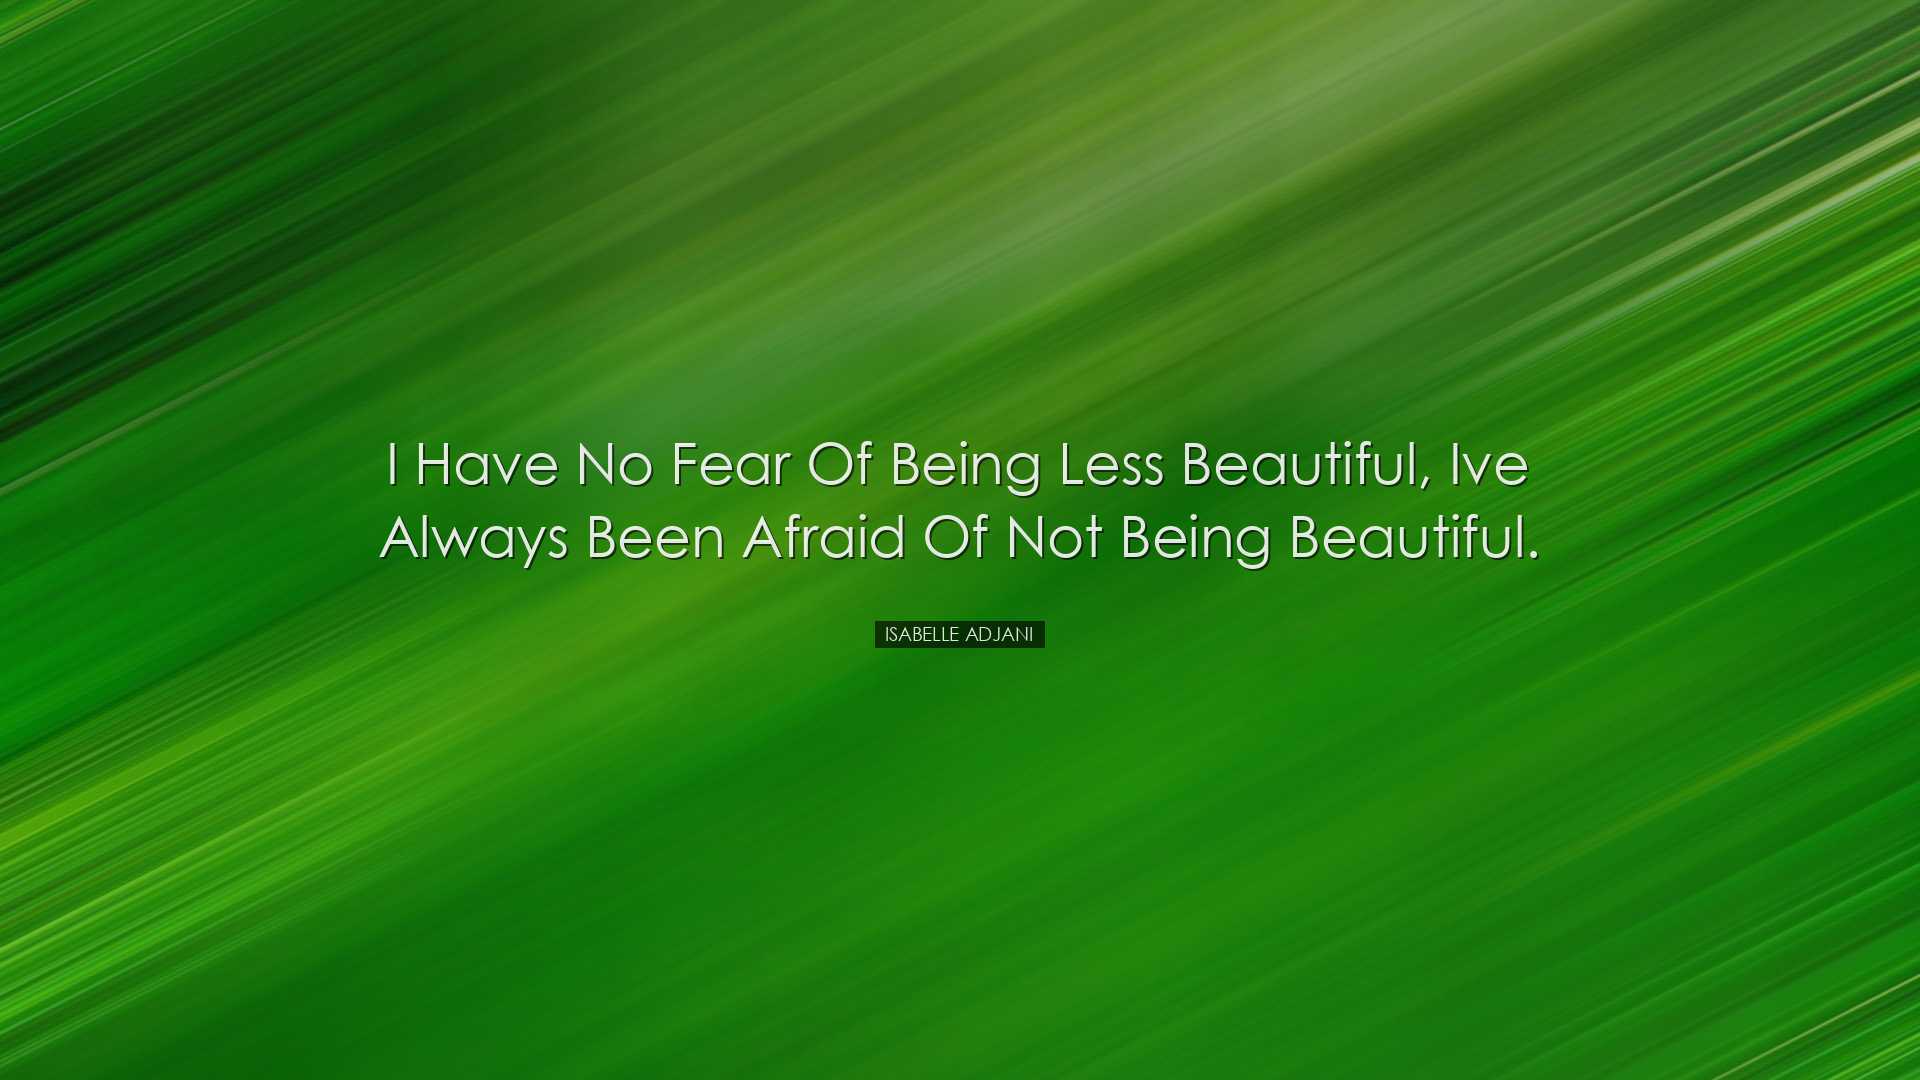 I have no fear of being less beautiful, Ive always been afraid of